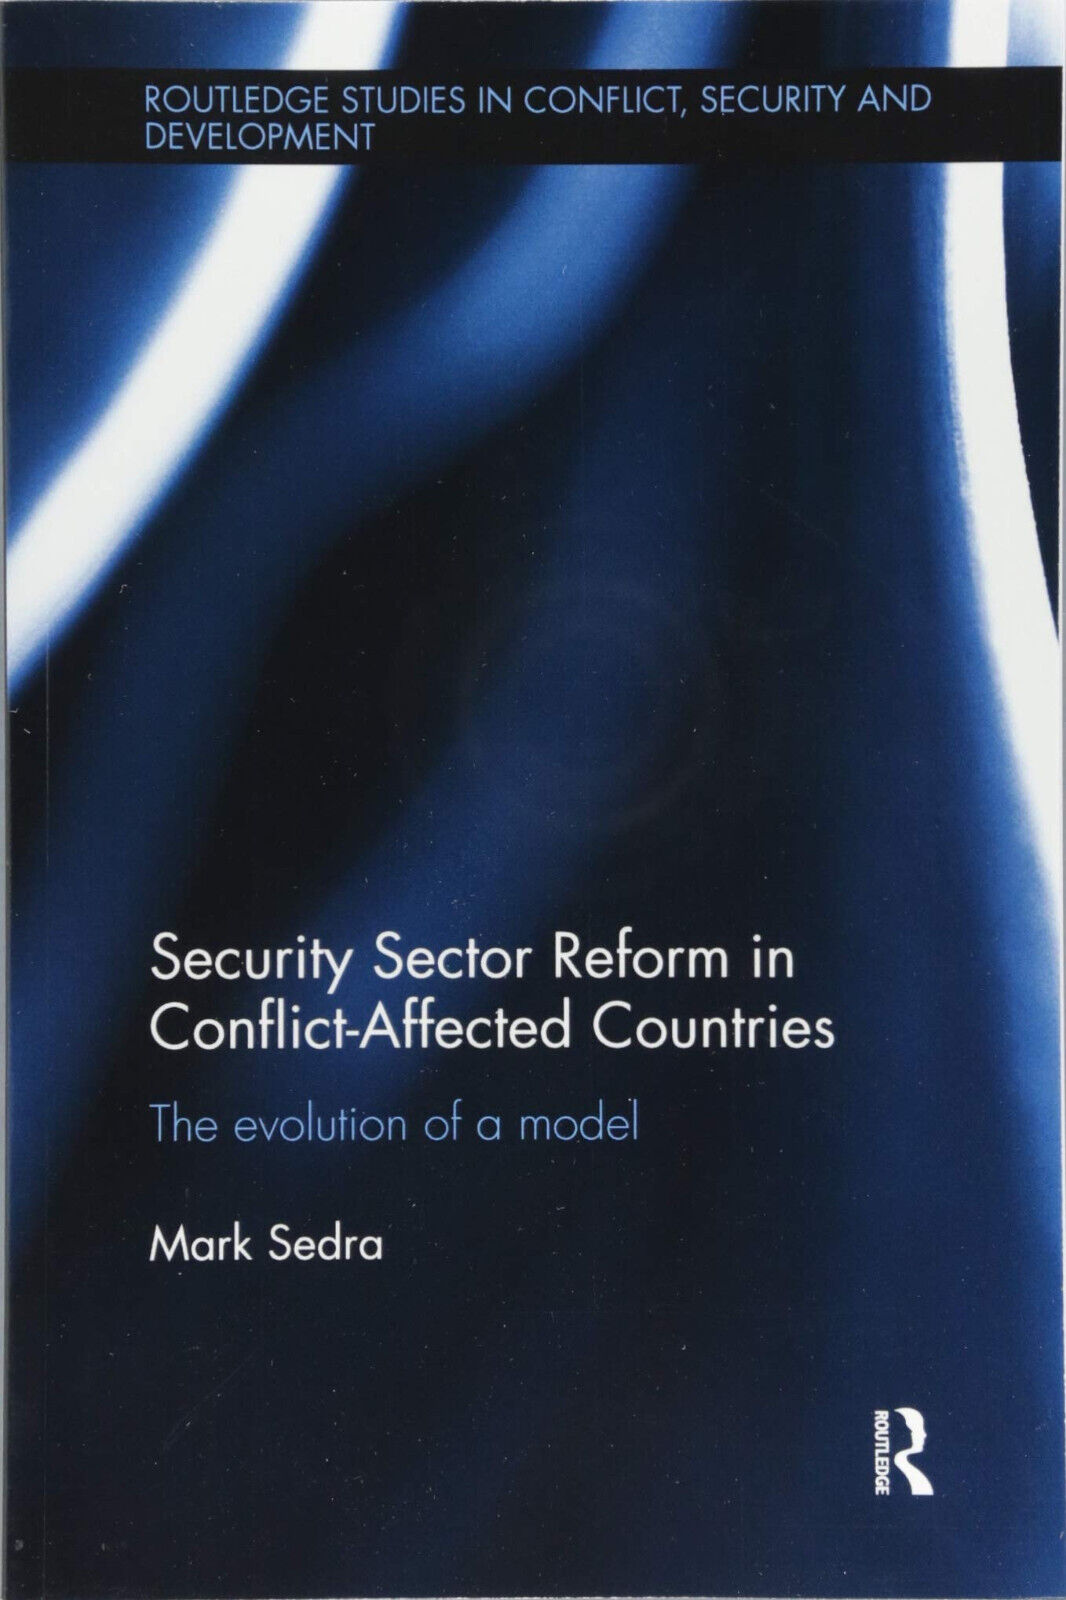 Security Sector Reform in Conflict-Affected Countries - Mark - Routledge, 2018